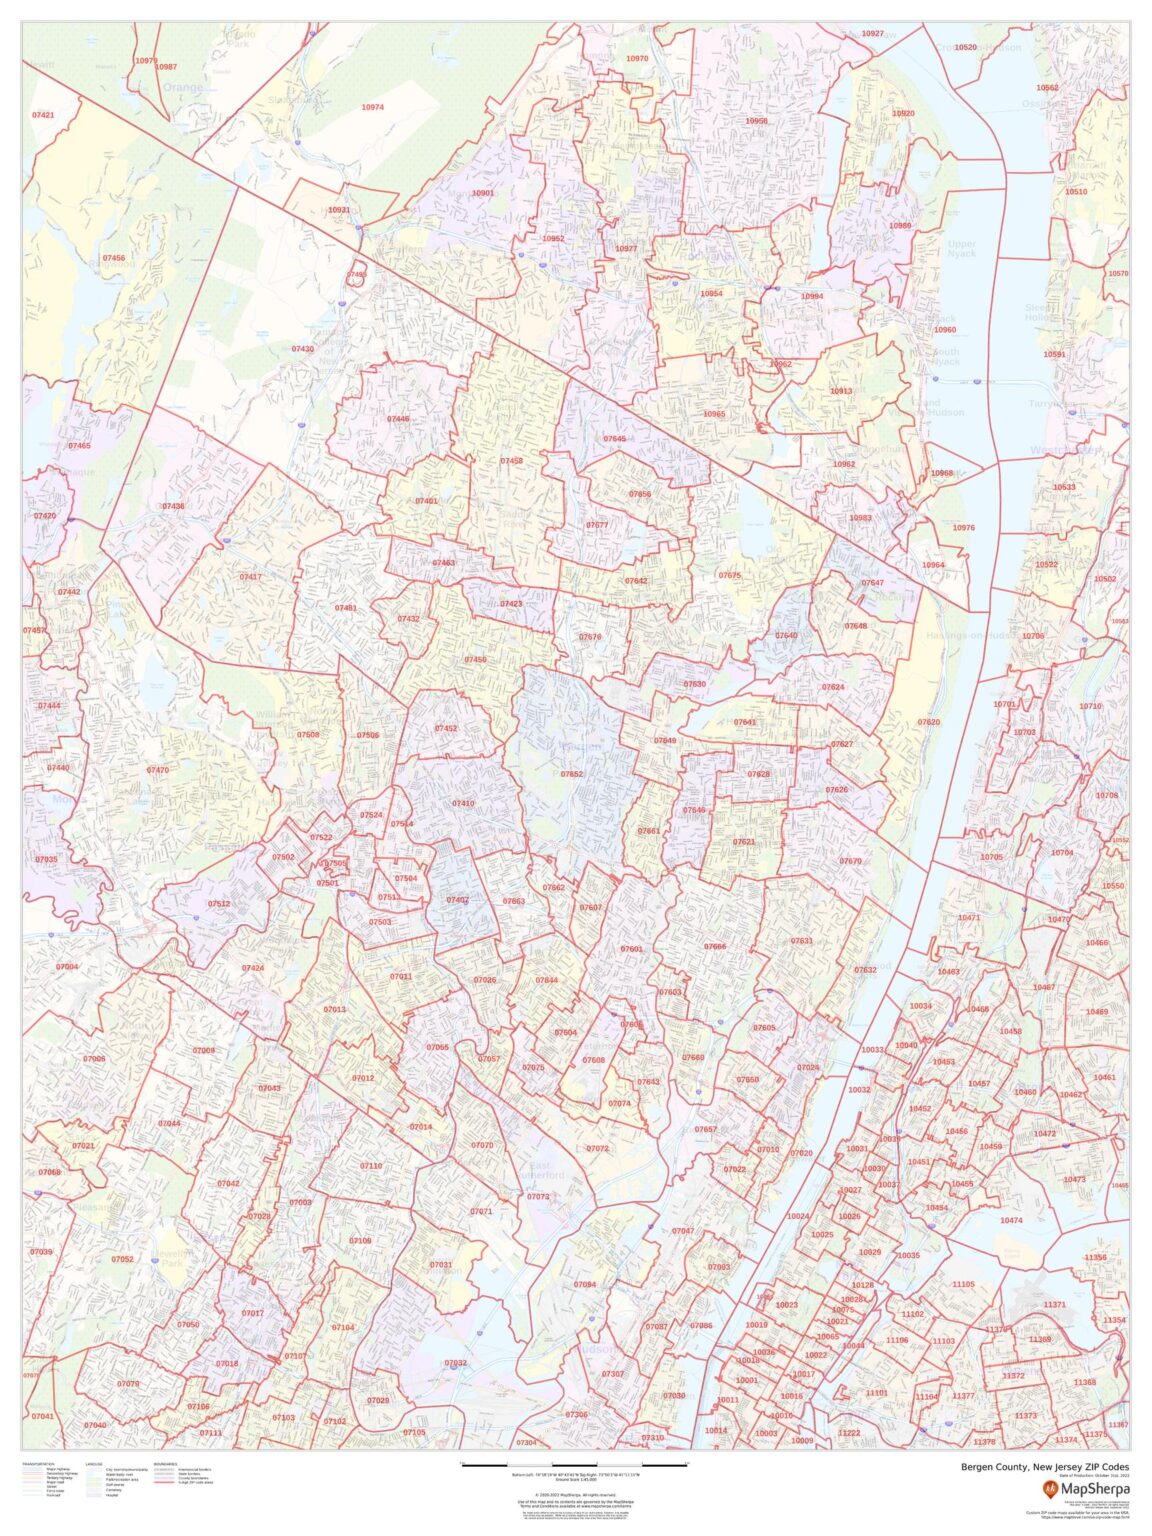 Bergen County, New Jersey ZIP Codes by MapSherpa - The Map Shop